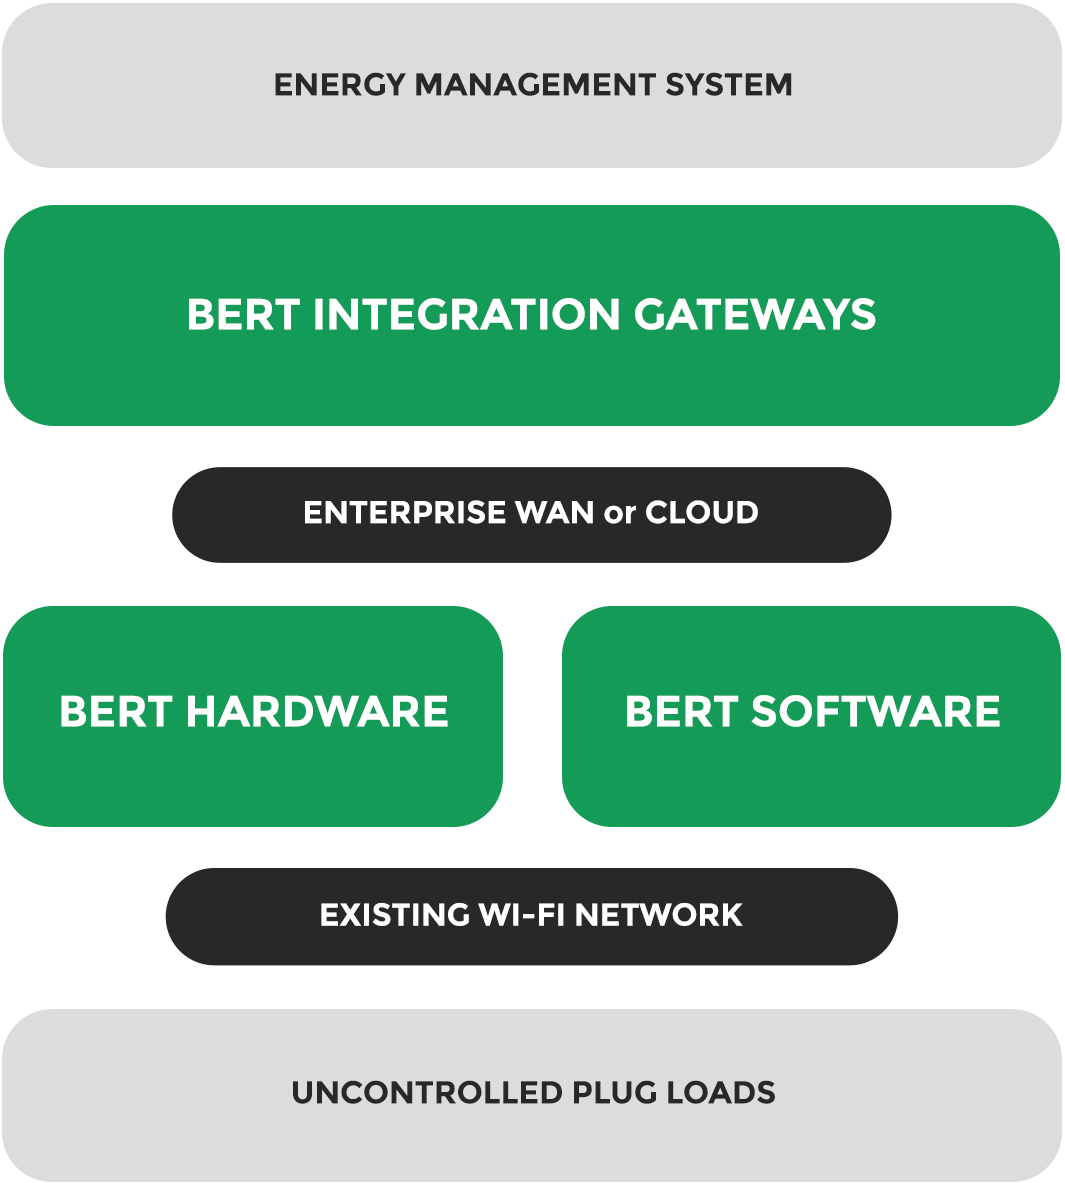 The Bert Plug Load Solution includes integration gateways, hardware and software that use the existing wireless network to control plug loads